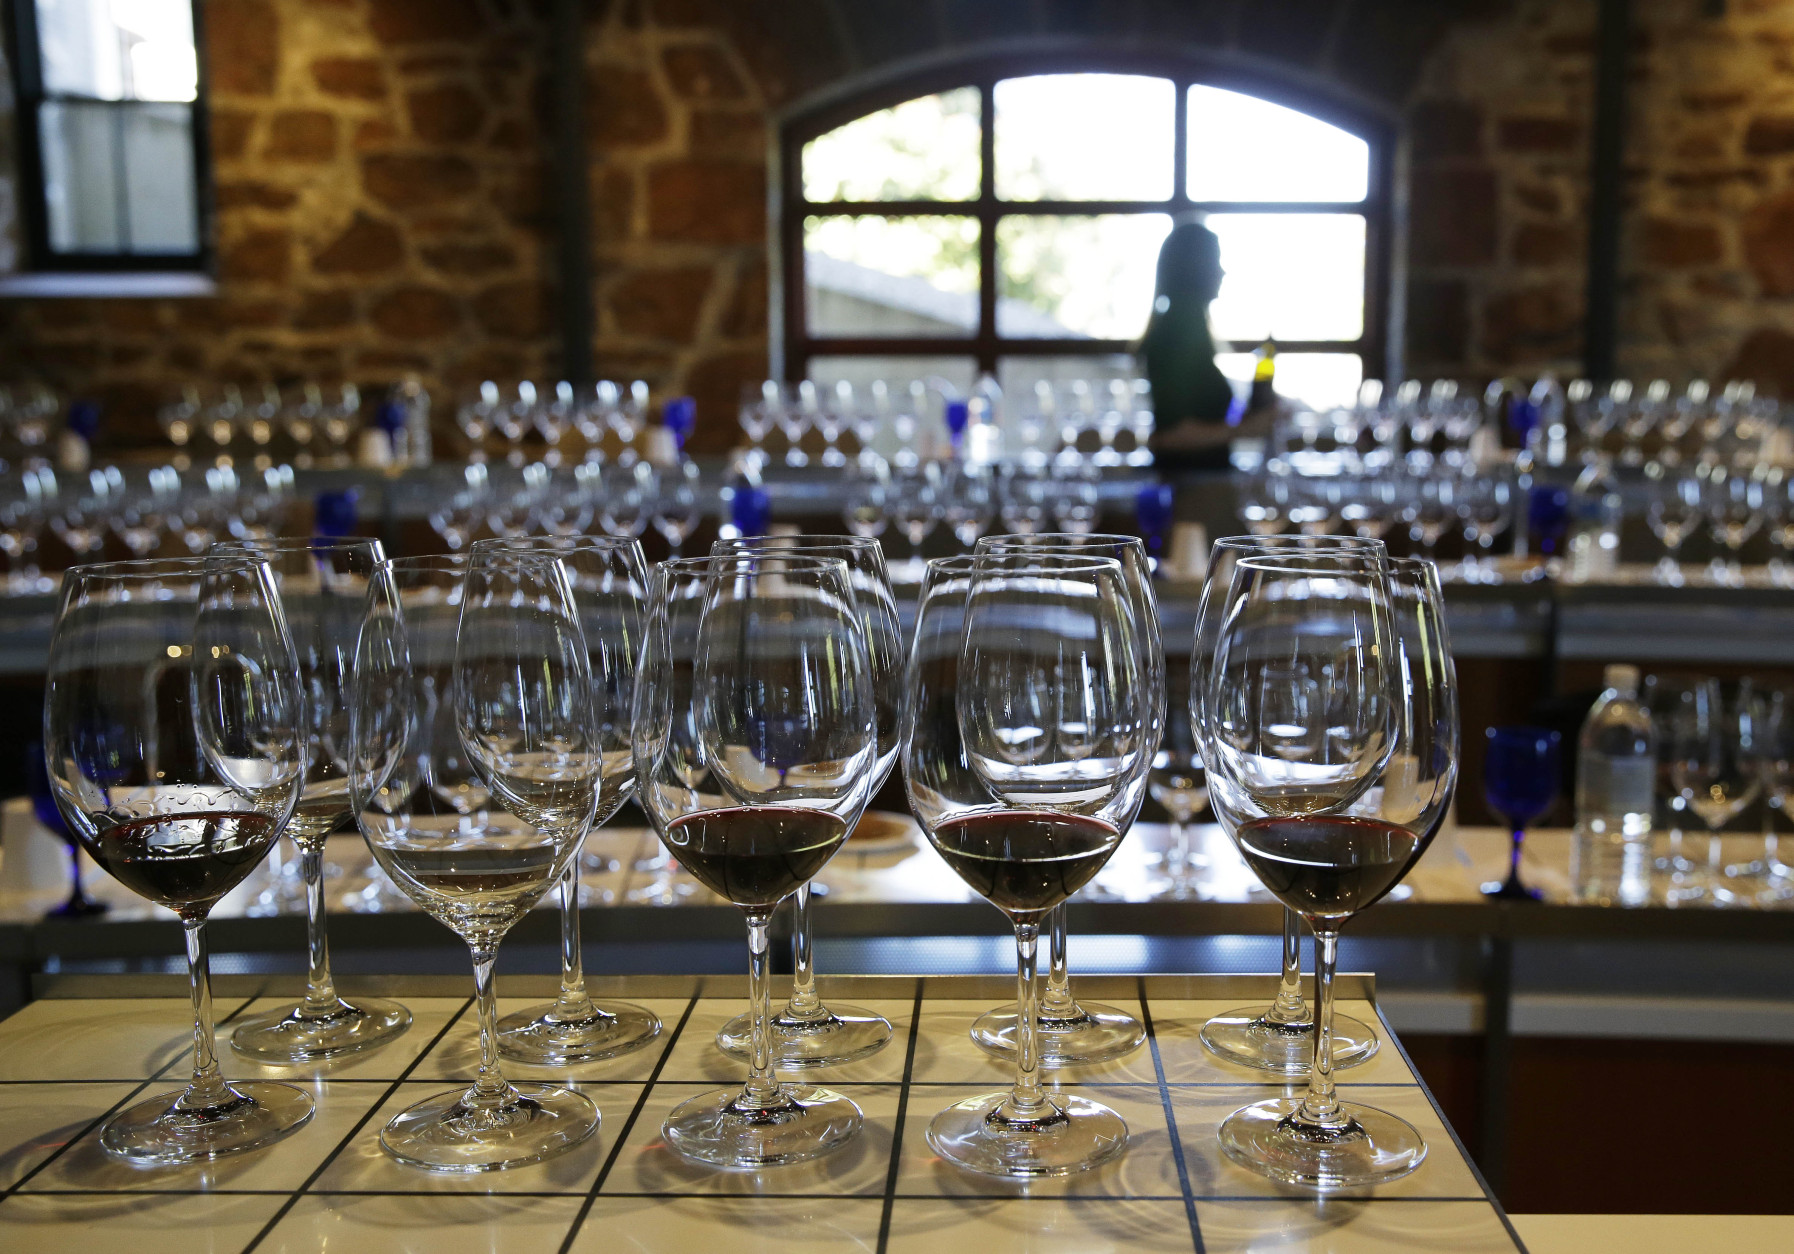 The Orin Swift brand offers consumers a choice of wines running the international gamut, including six labels from California and additional selections from France, Corsica and Argentina.  (AP Photo/Eric Risberg)